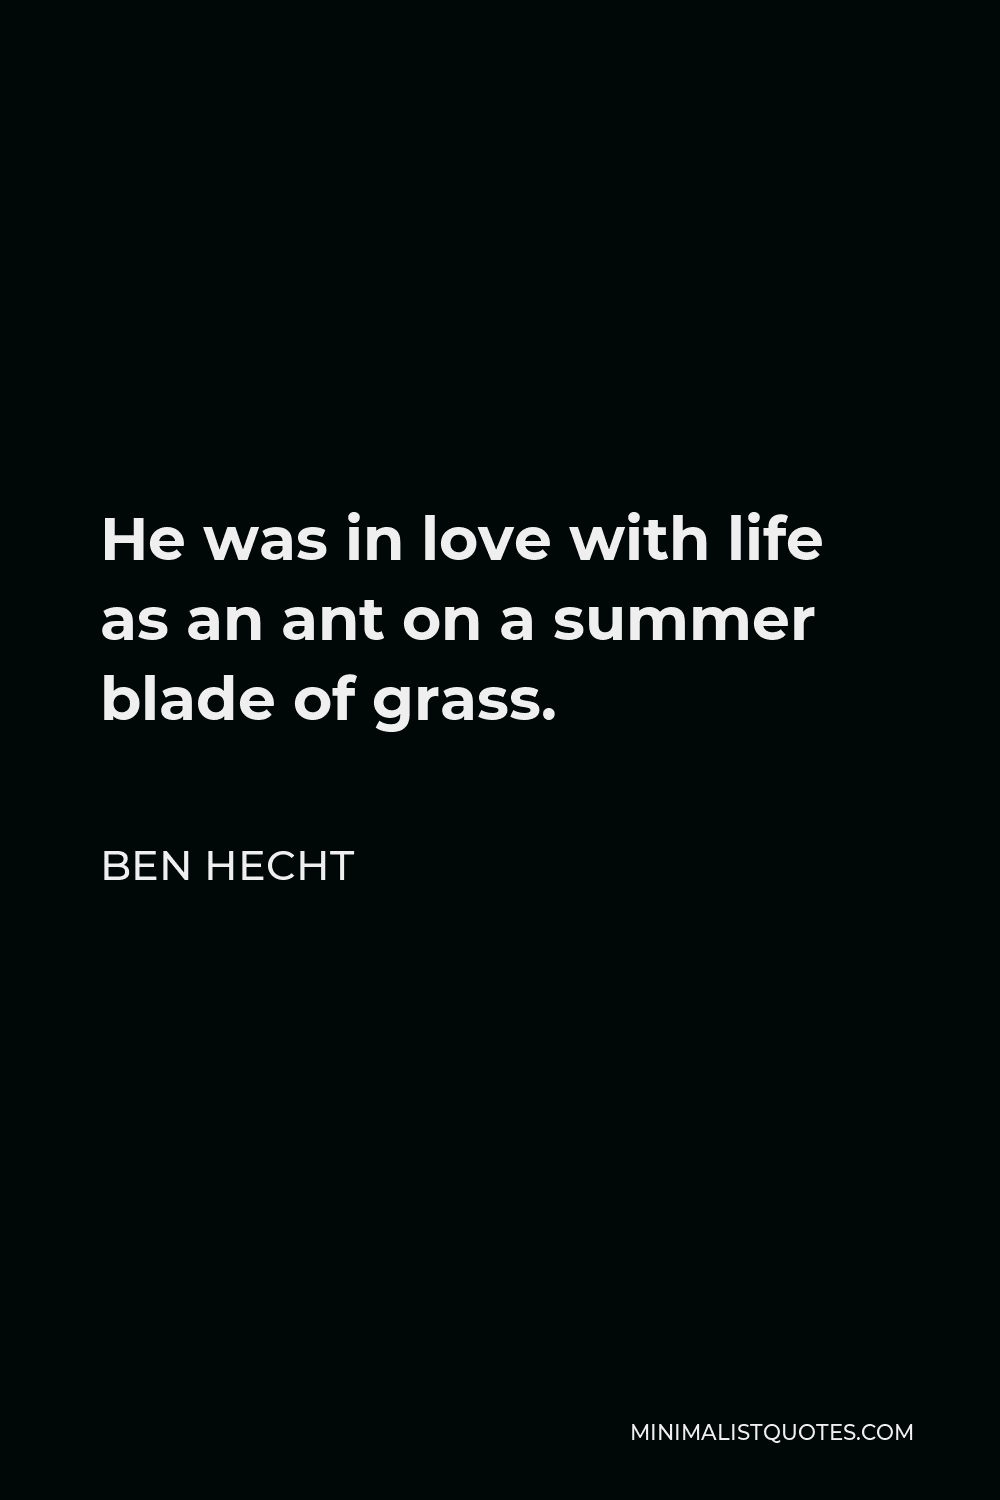 Ben Hecht Quote - He was in love with life as an ant on a summer blade of grass.